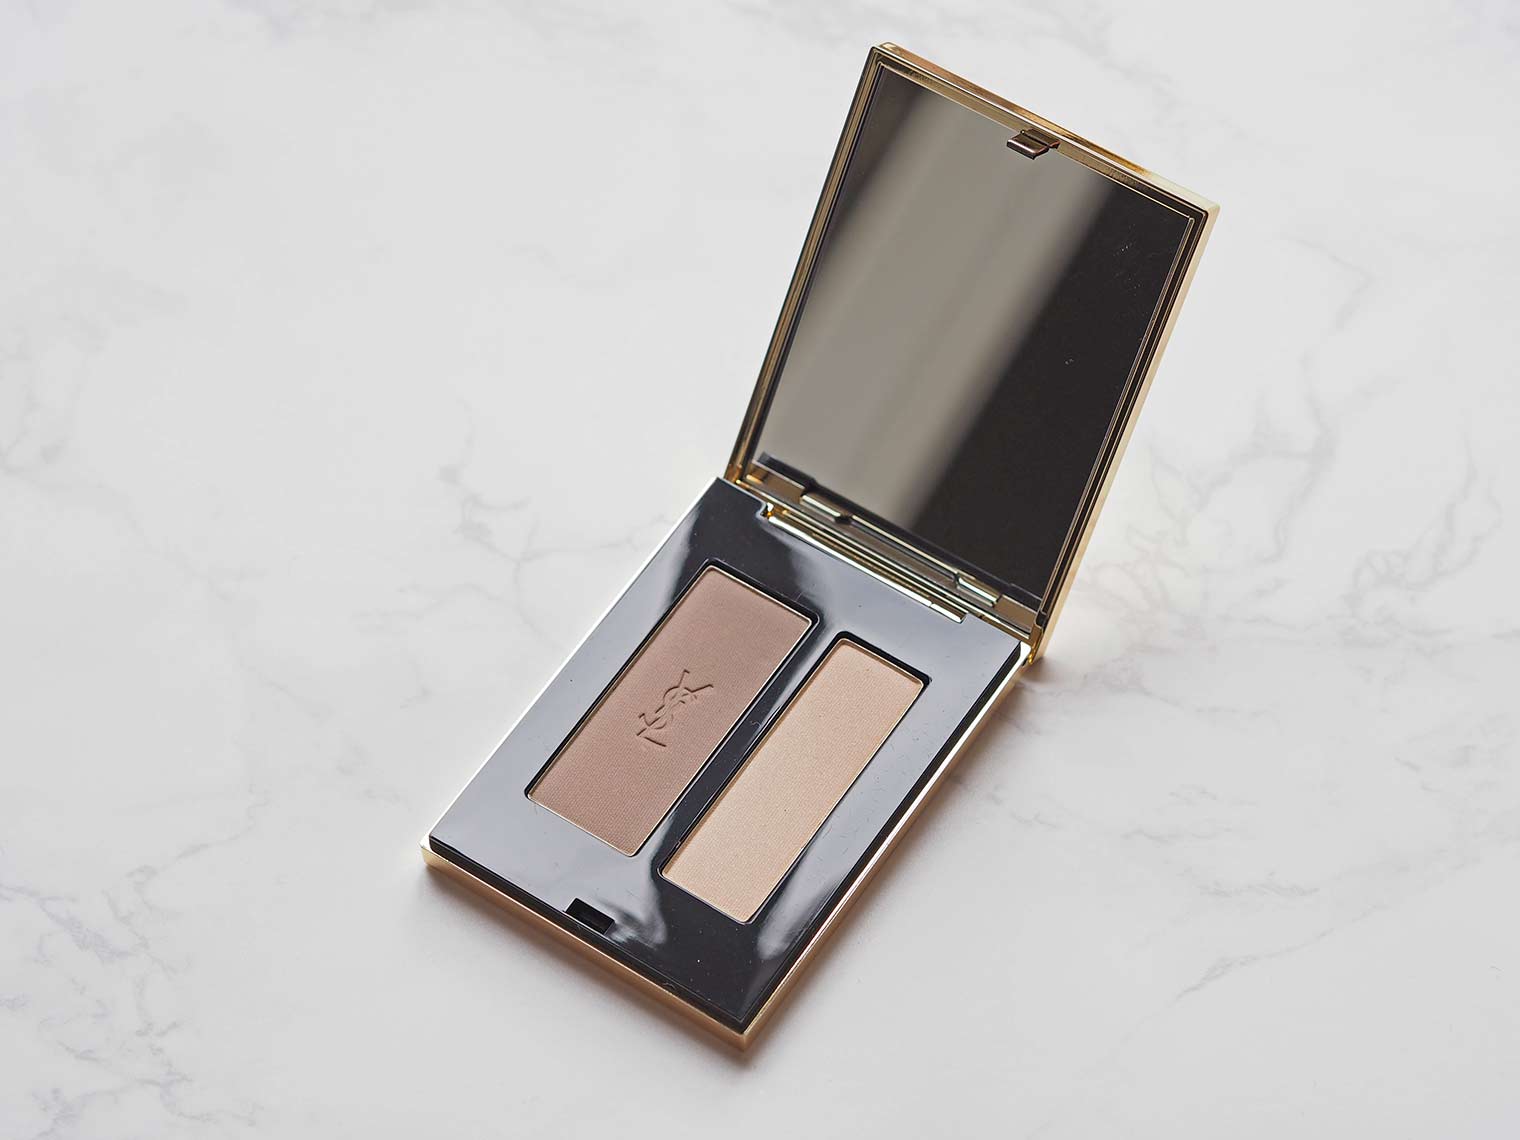 YSL makeup product Couture Contouring No 1